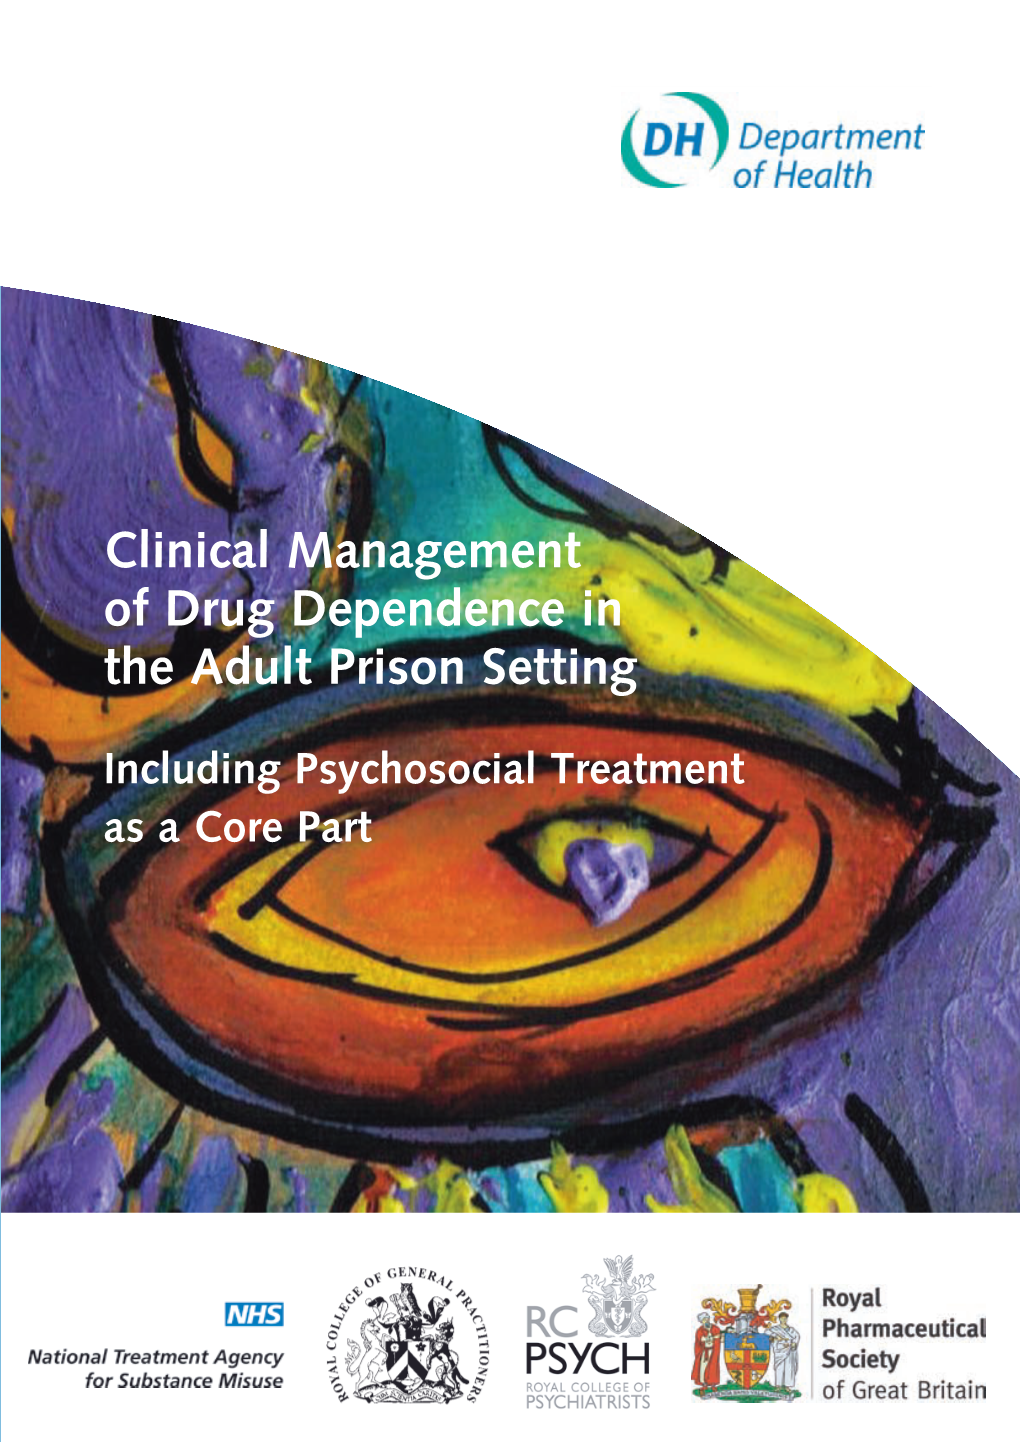 Clinical Management of Drug Dependence in the Adult Prison Setting